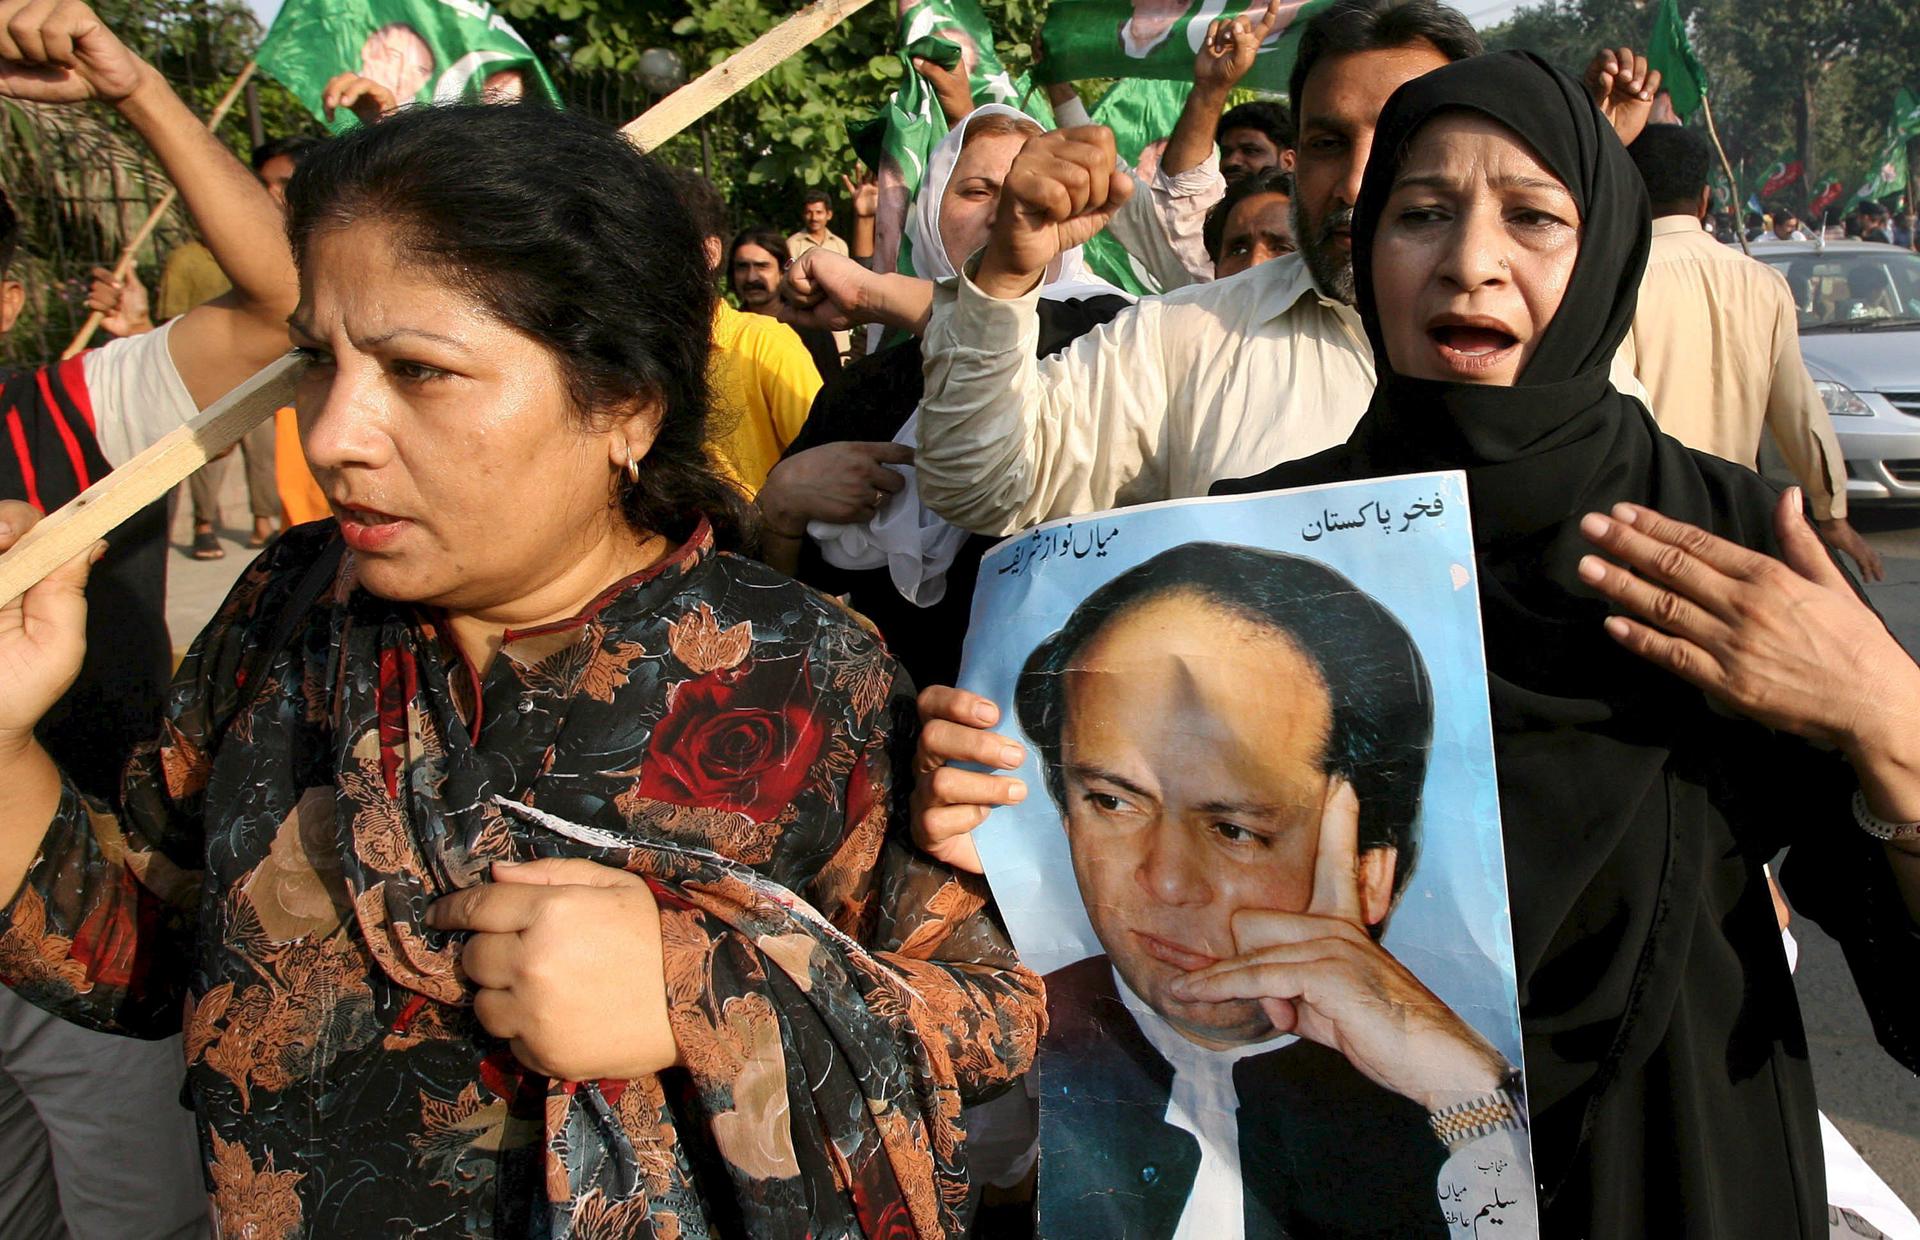 Supporters of former Pakistani Prime Minister Nawaz Sharif's party (PML-N) carry his portrait during a protest in Lahore, Pakistan, September 11, 2007. EFE/FILE/Rahat Dar